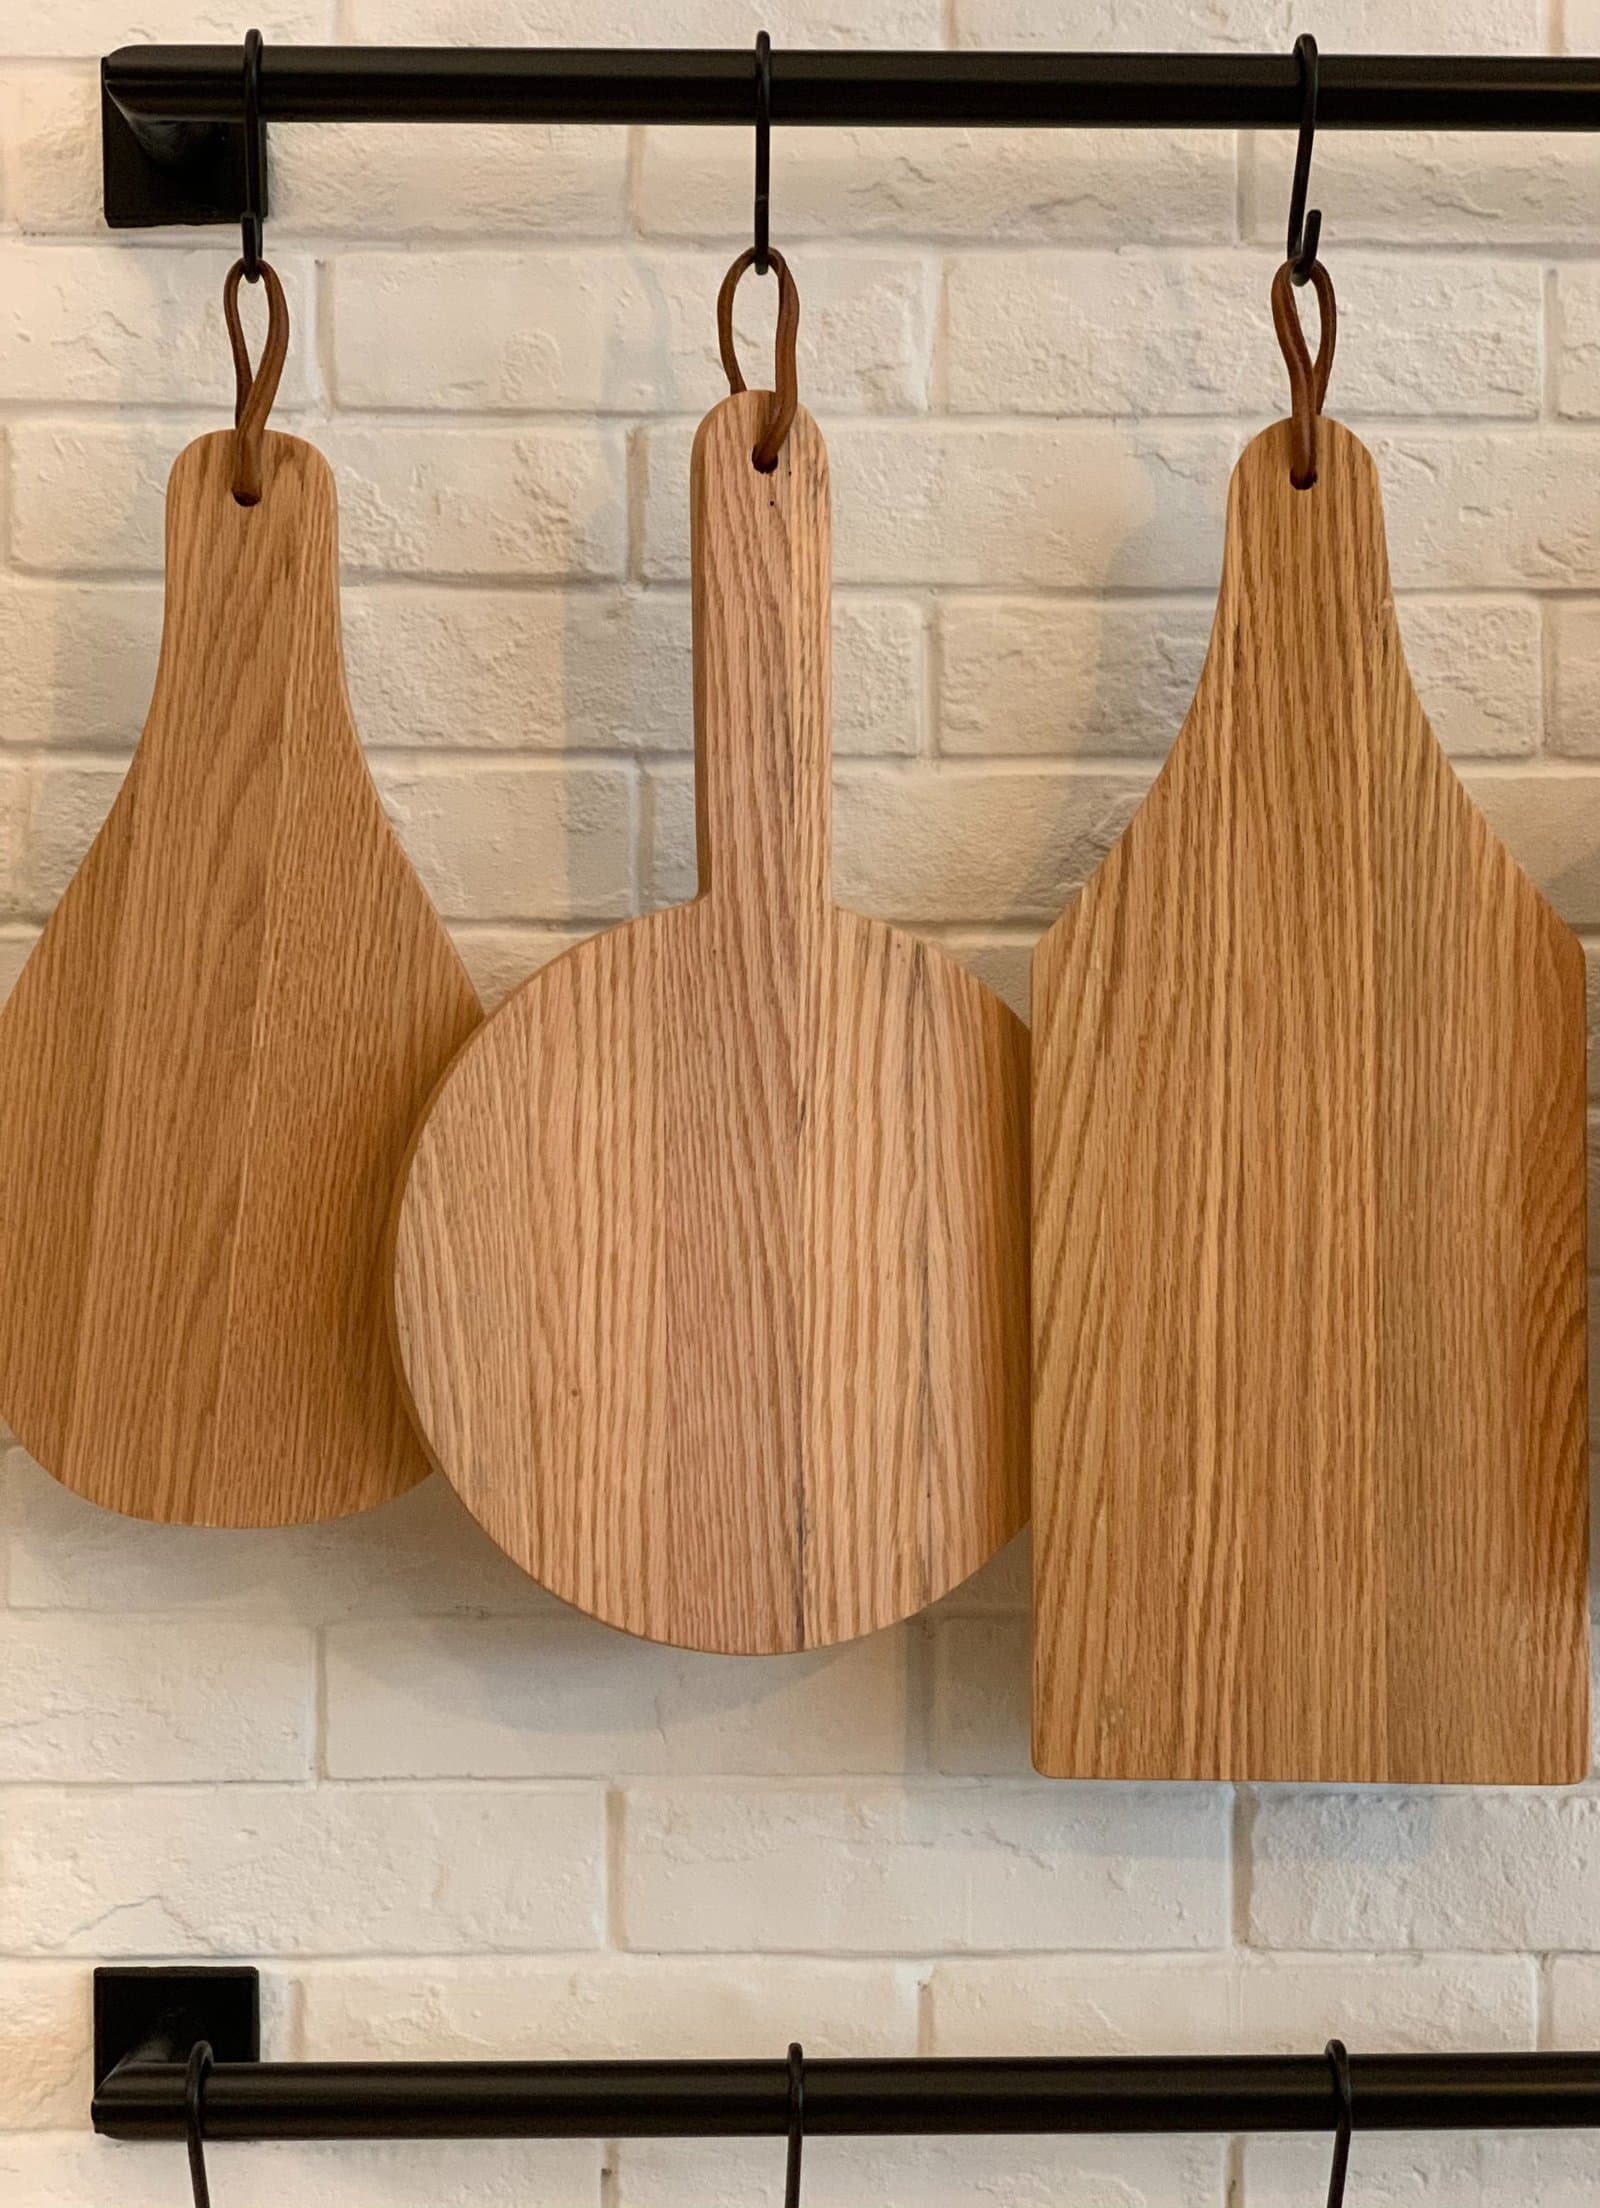  Hang Your Cutting Boards on the Wall scaled